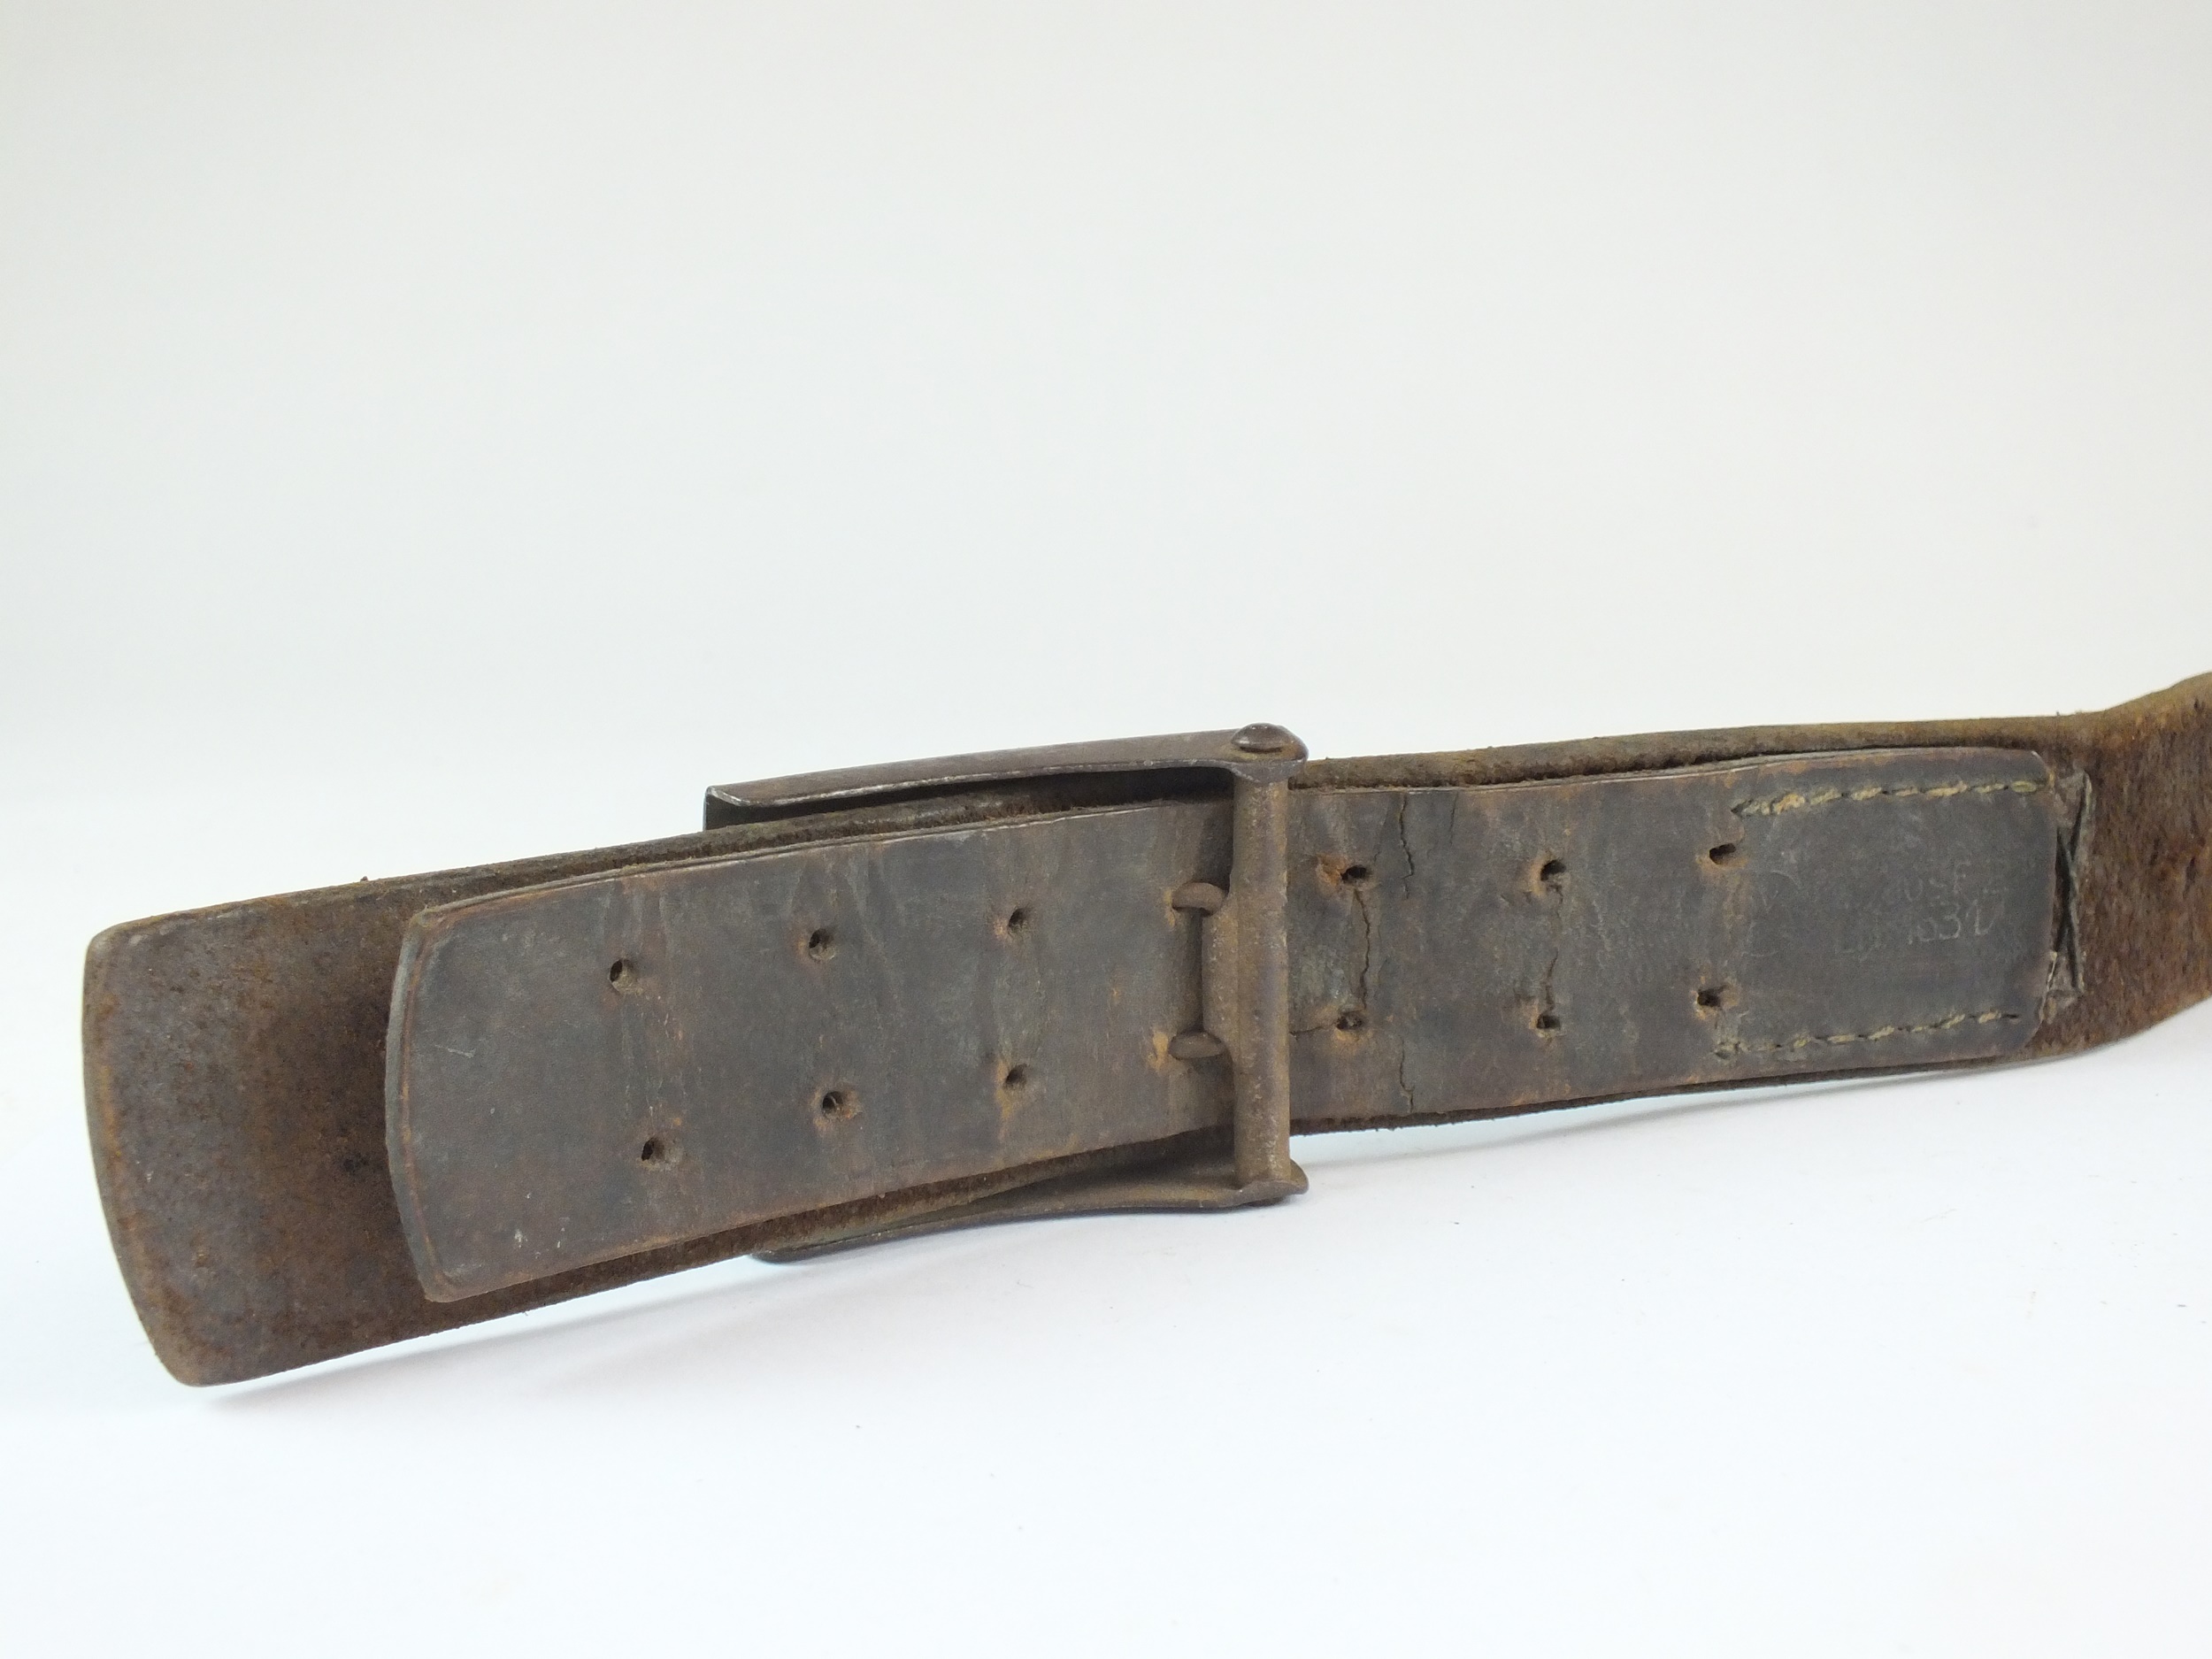 German Hitler Youth belt with buckle - Image 5 of 5